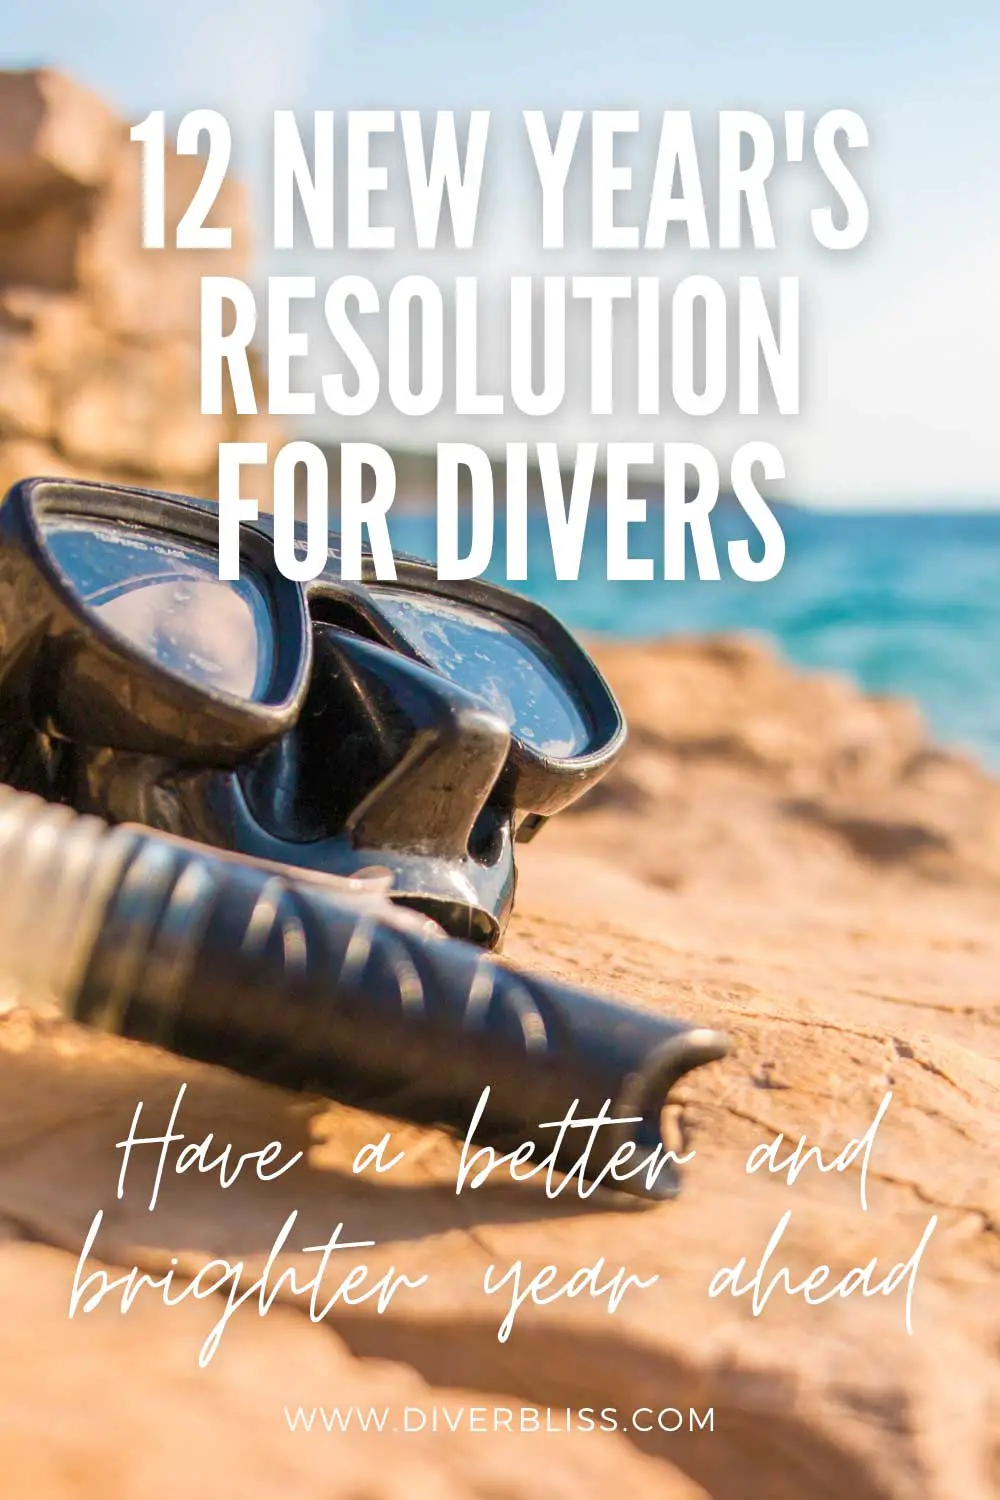 12 New Year's Resolution for divers, Have a better and brighter year ahead